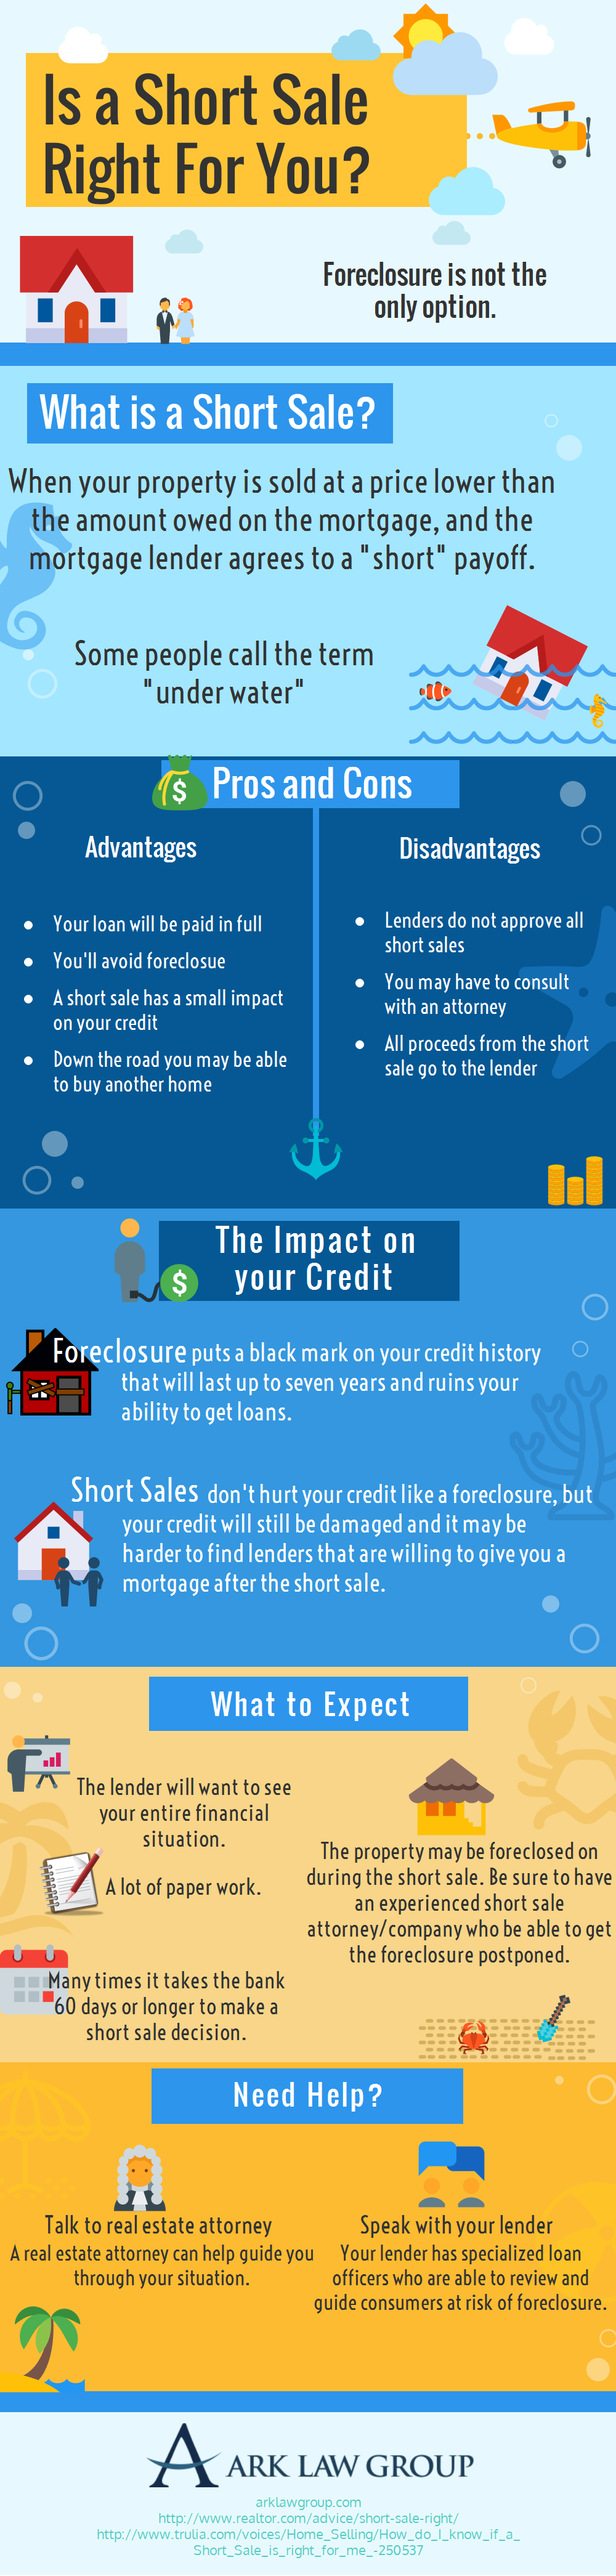 Is a Short Sale Right For You?